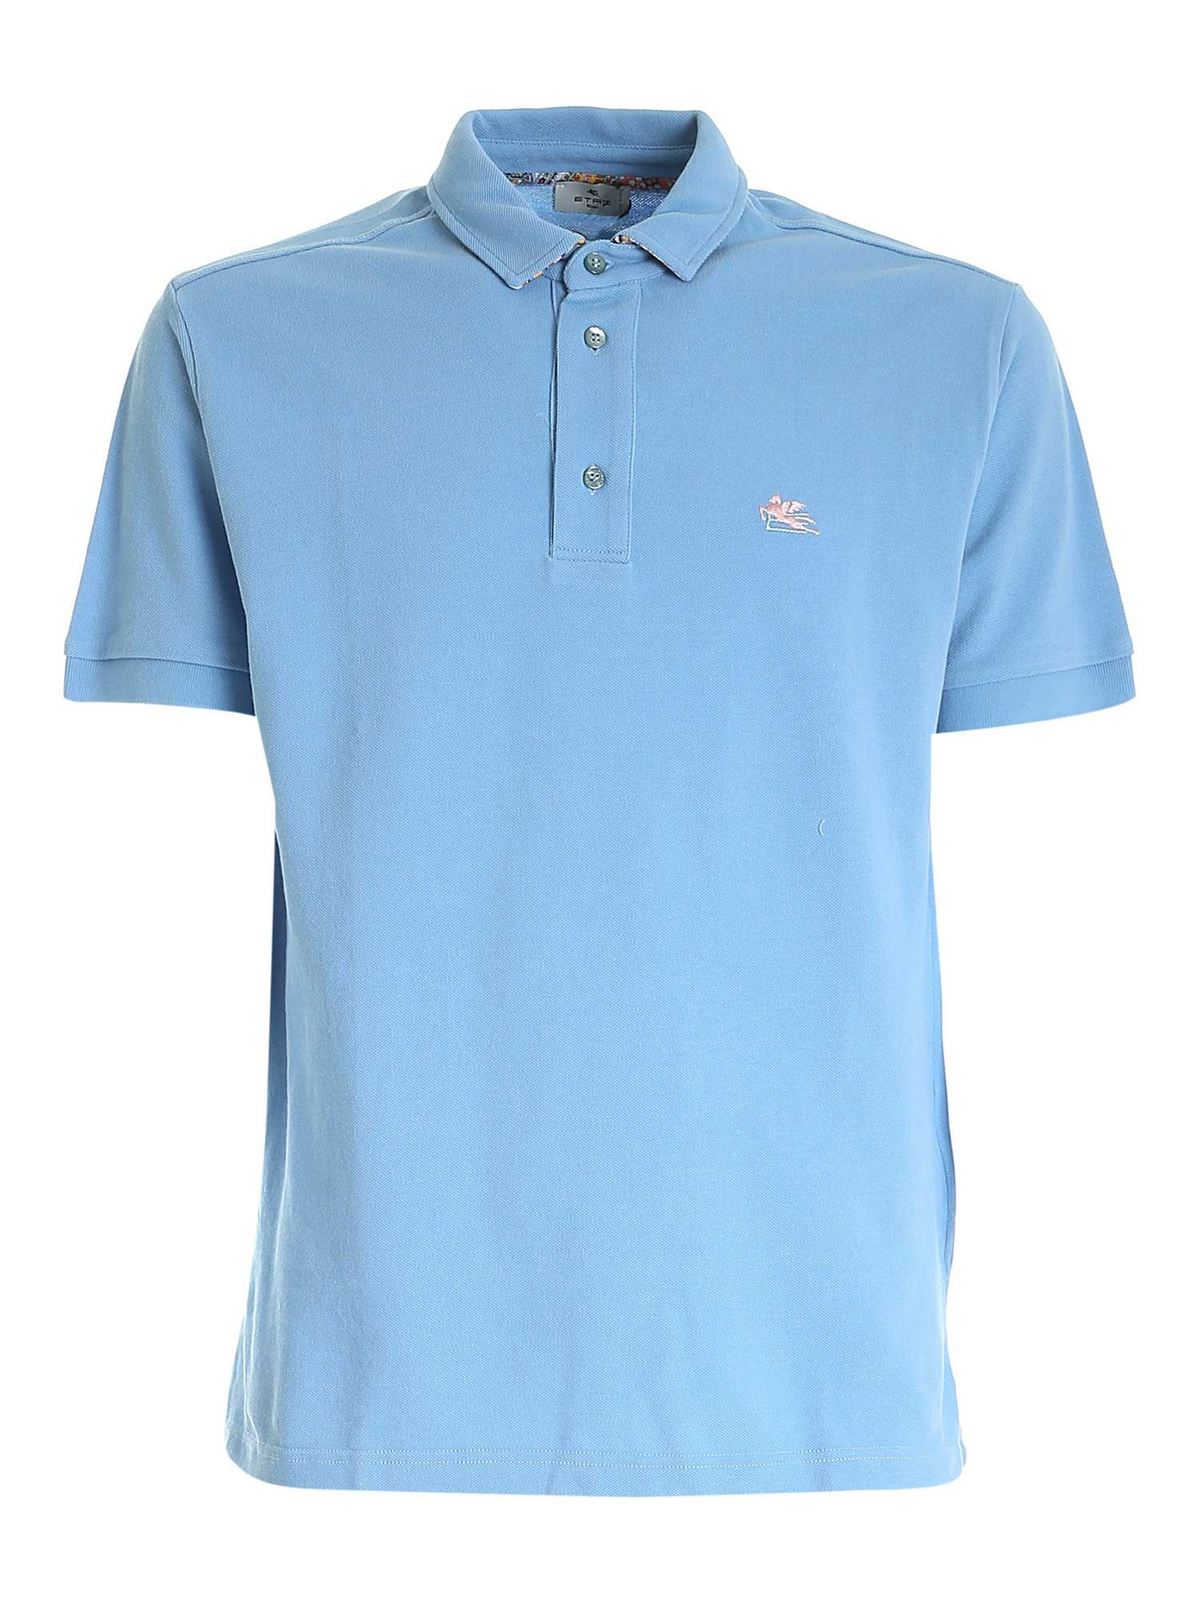 Etro LOGO EMBROIDERY POLO SHIRT IN LIGHT BLUE